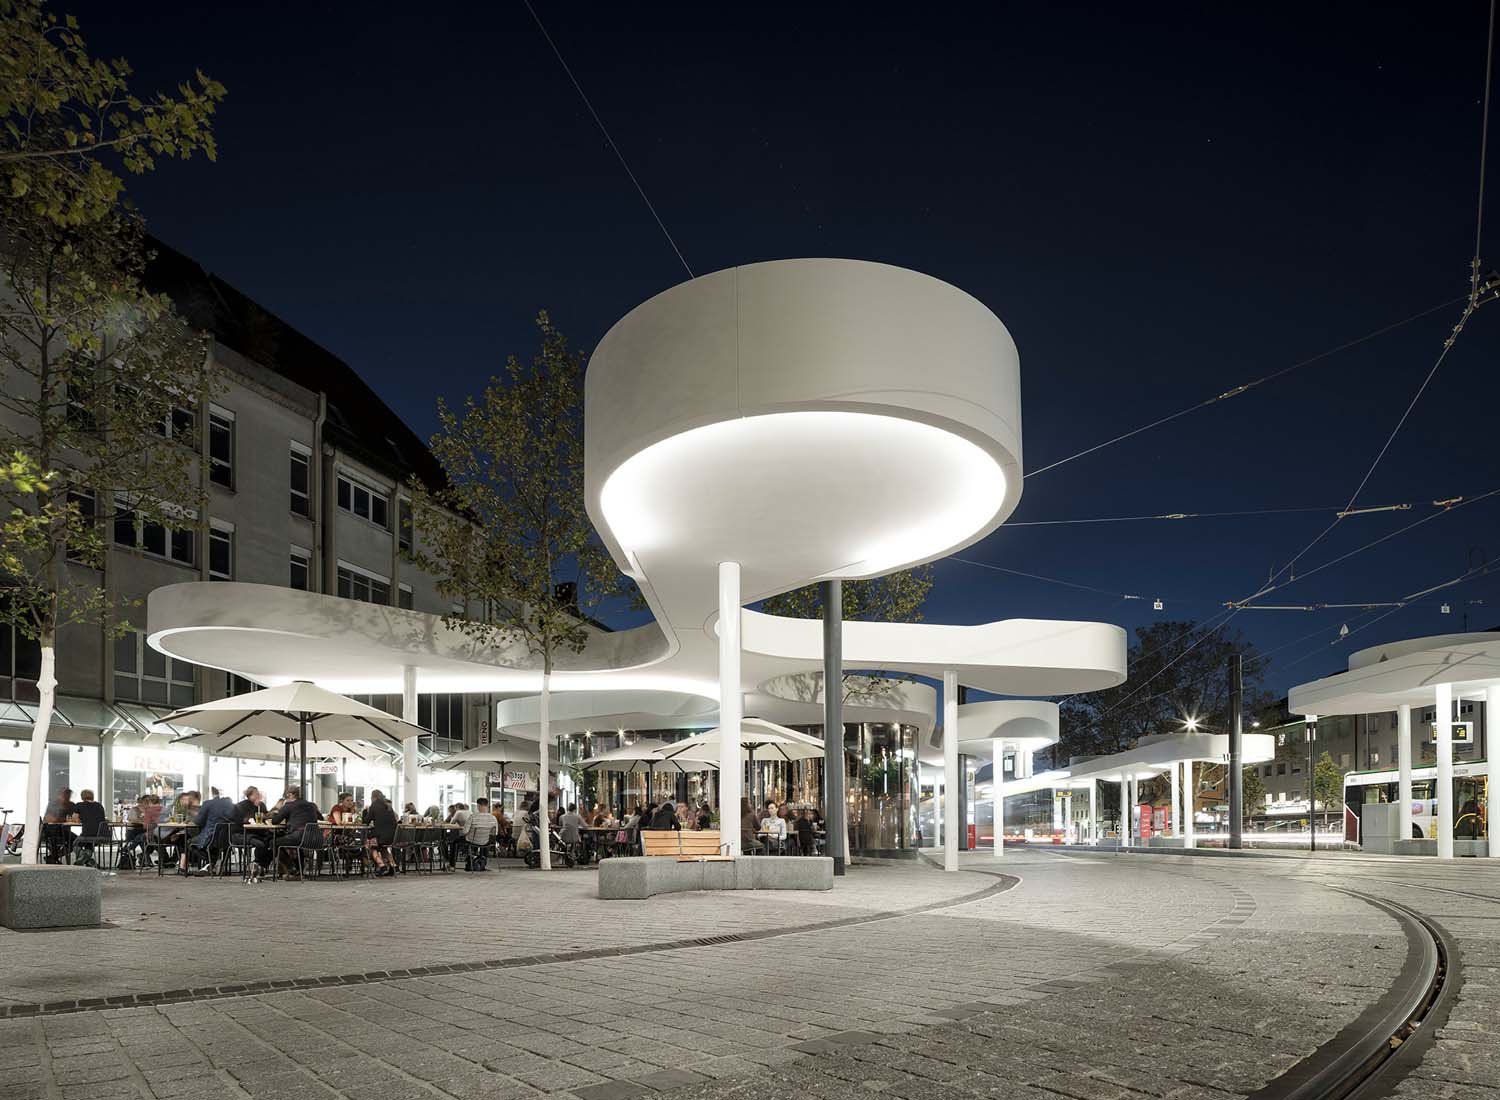 Perspective from East with Restaurant Use at Nighttime with Lighting | David Franck